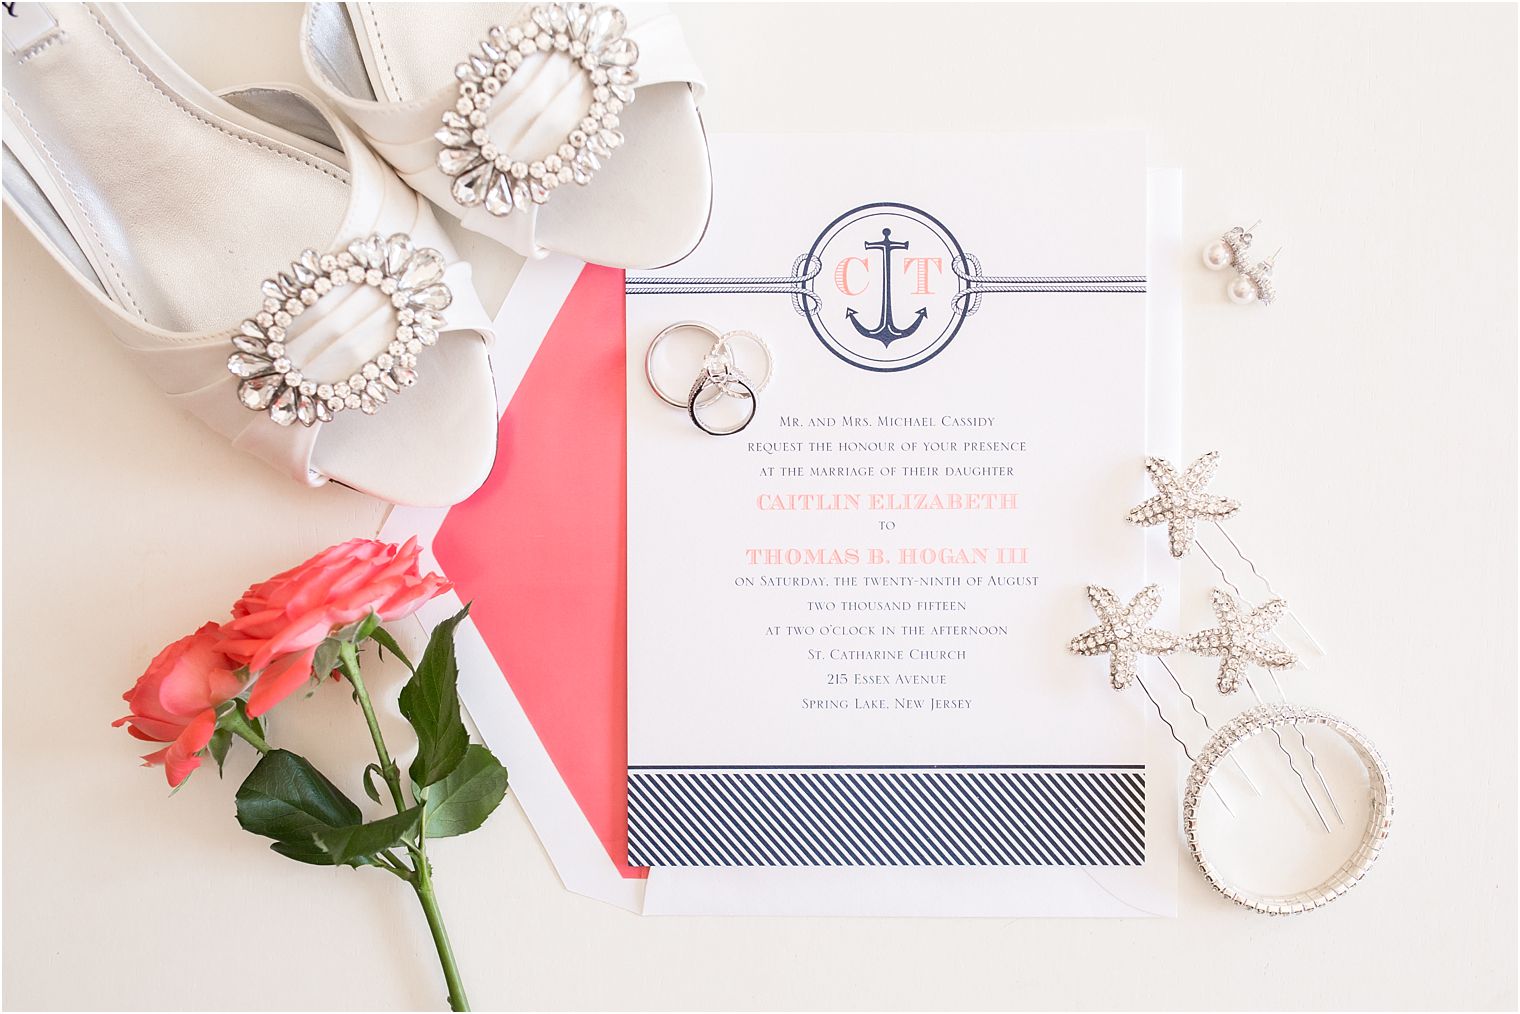 Nautical-themed invitations by The Papery